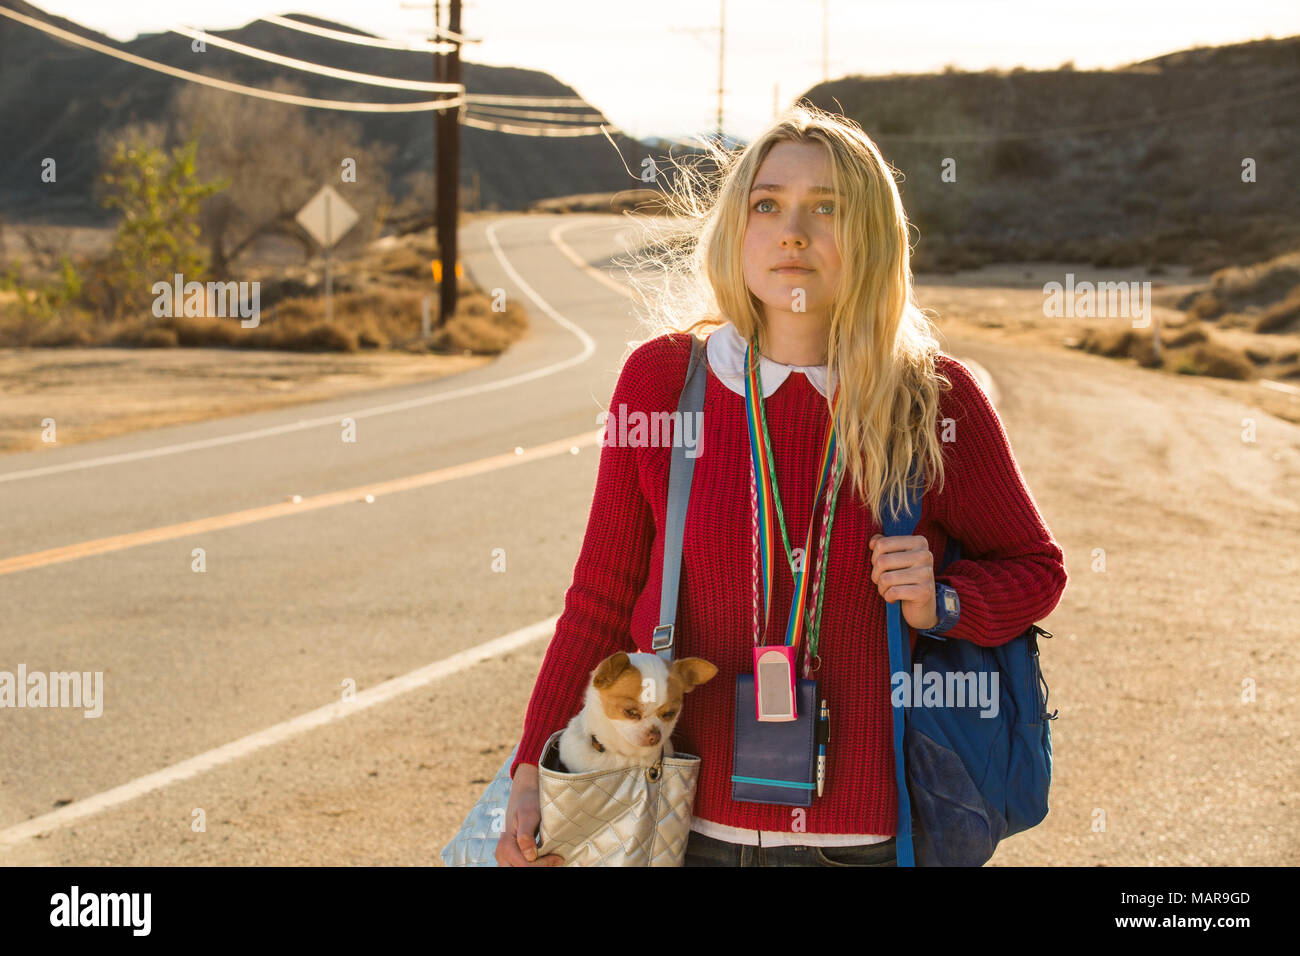 RELEASE DATE: January 26, 2018 TITLE: Please Stand By STUDIO: Magnolia Pictures DIRECTOR: Ben Lewin PLOT: A young autistic woman runs away from her caregiver in an attempt to submit her manuscript to a Star Trek writing competition. STARRING: DAKOTA FANNING as Wendy. (Credit Image: © Magnolia Pictures/Entertainment Pictures) Stock Photo